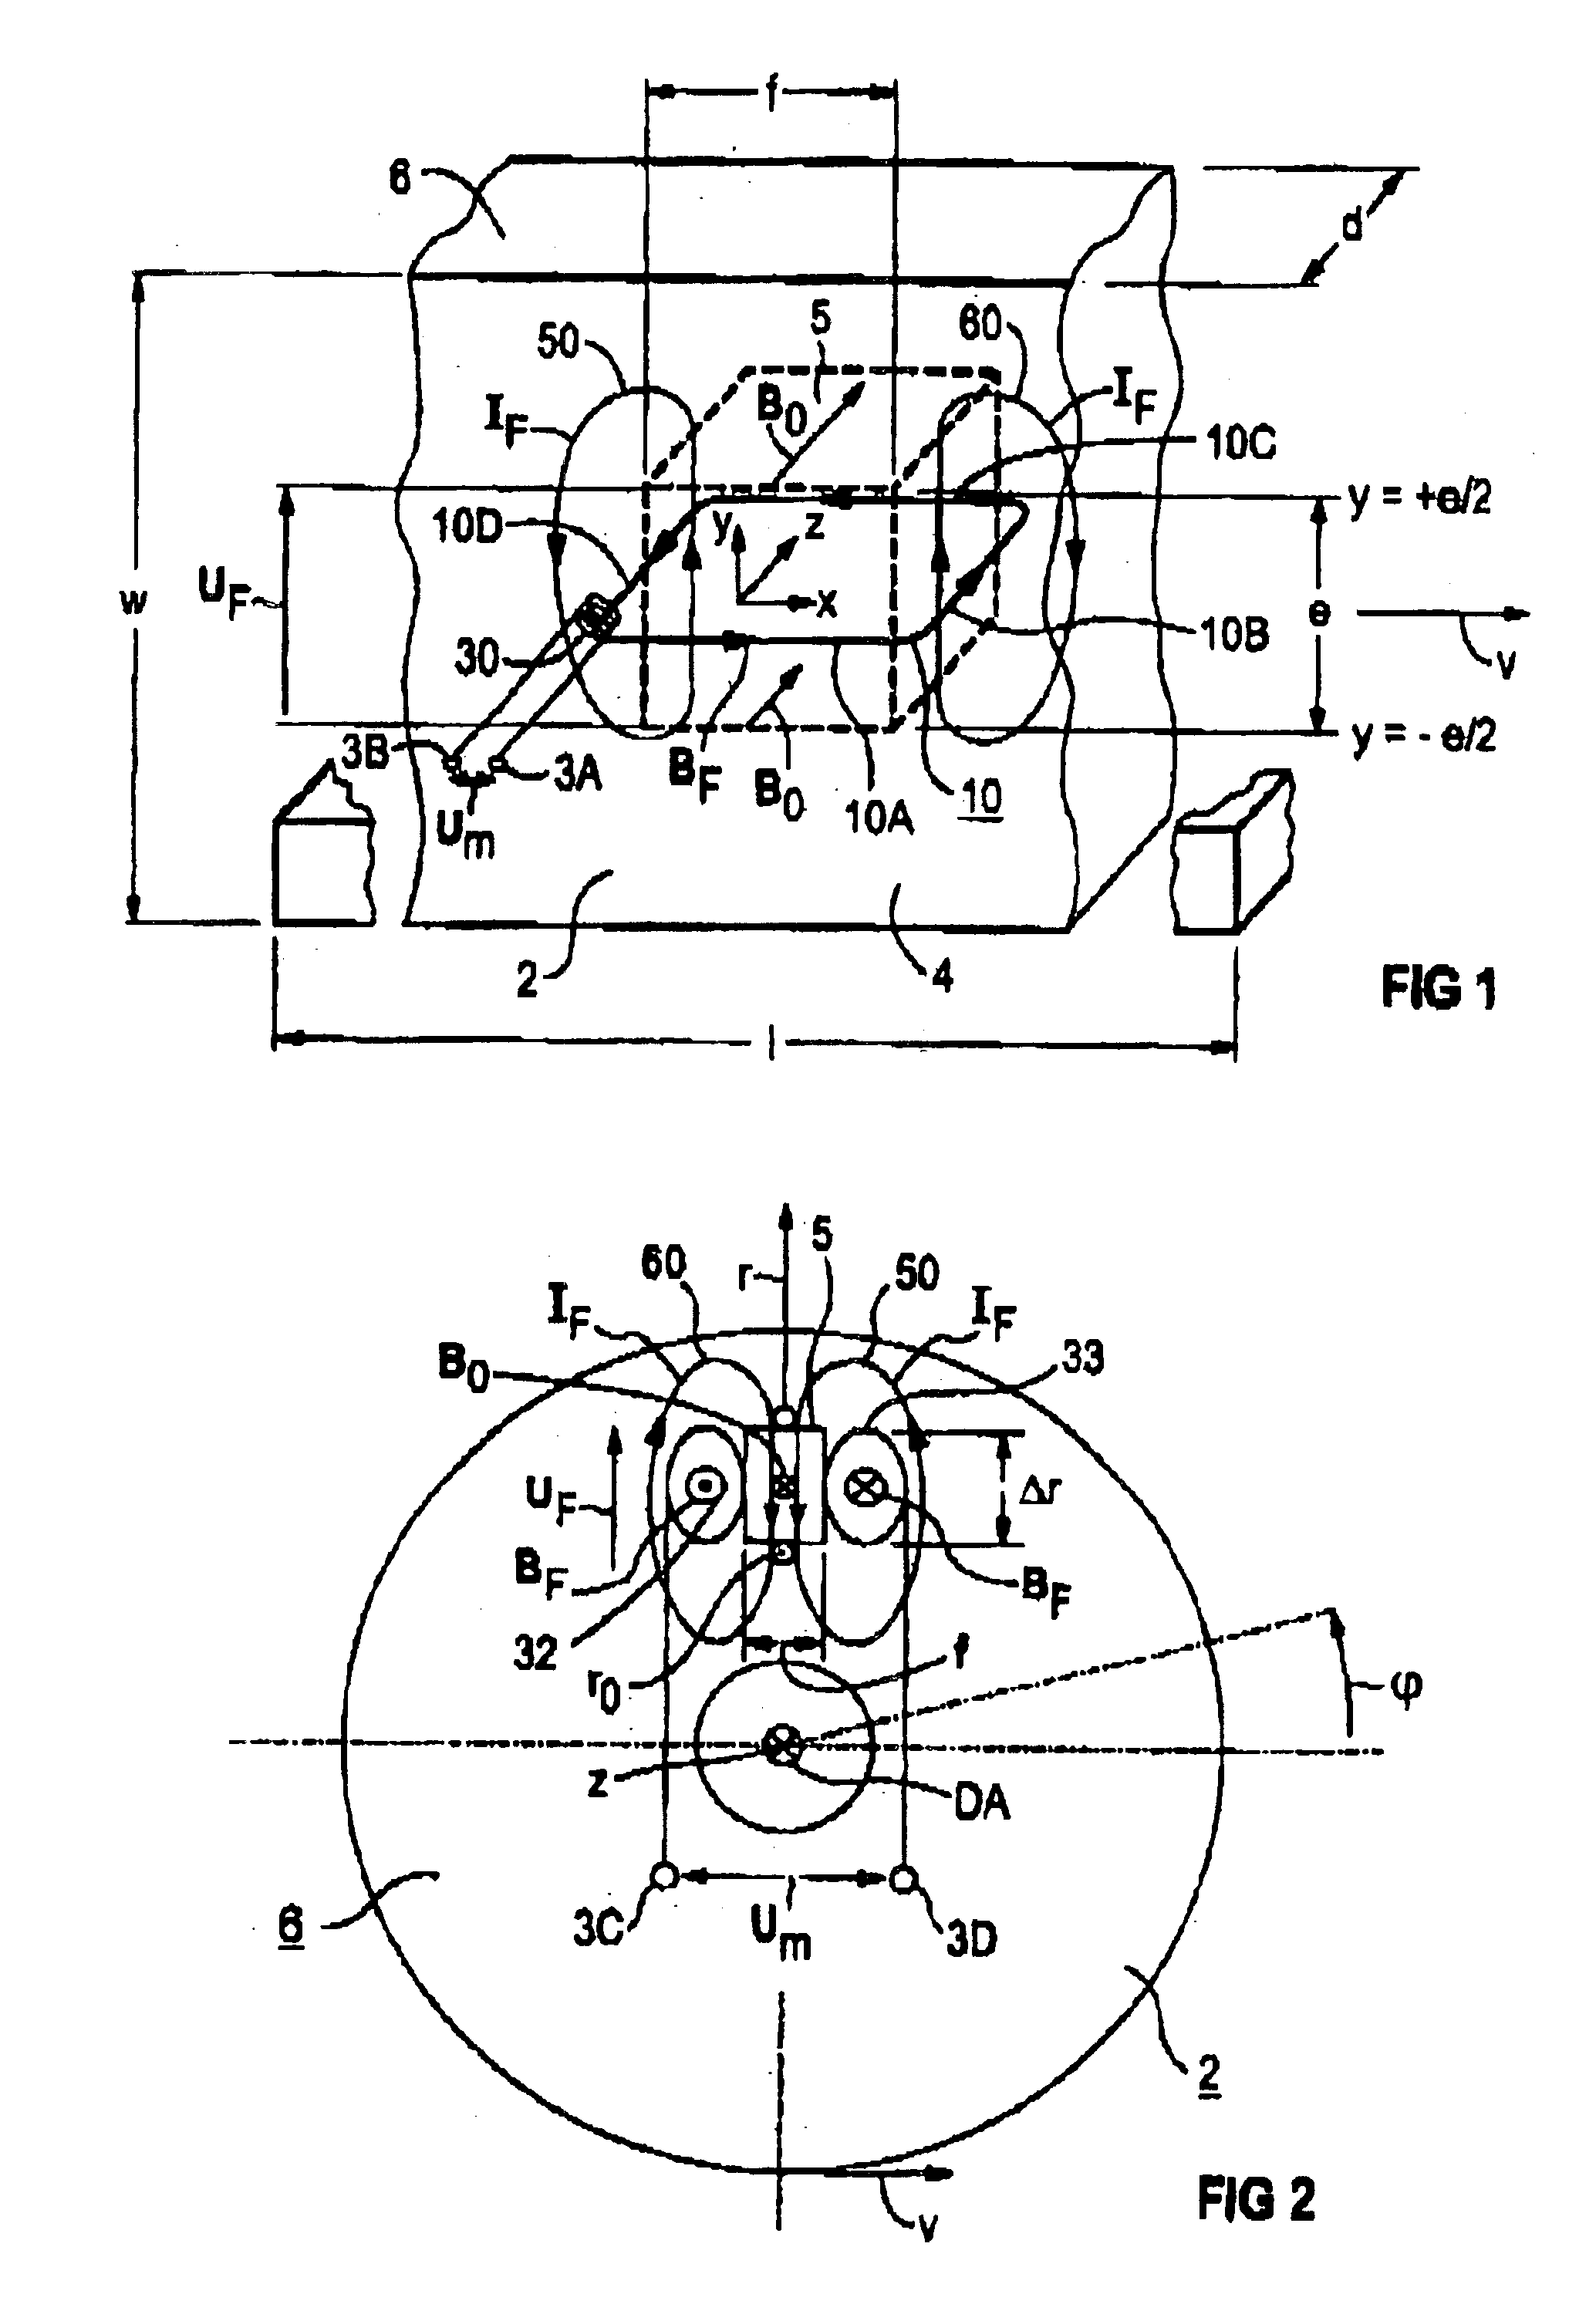 Device for measuring the motion of a conducting body through magnetic induction